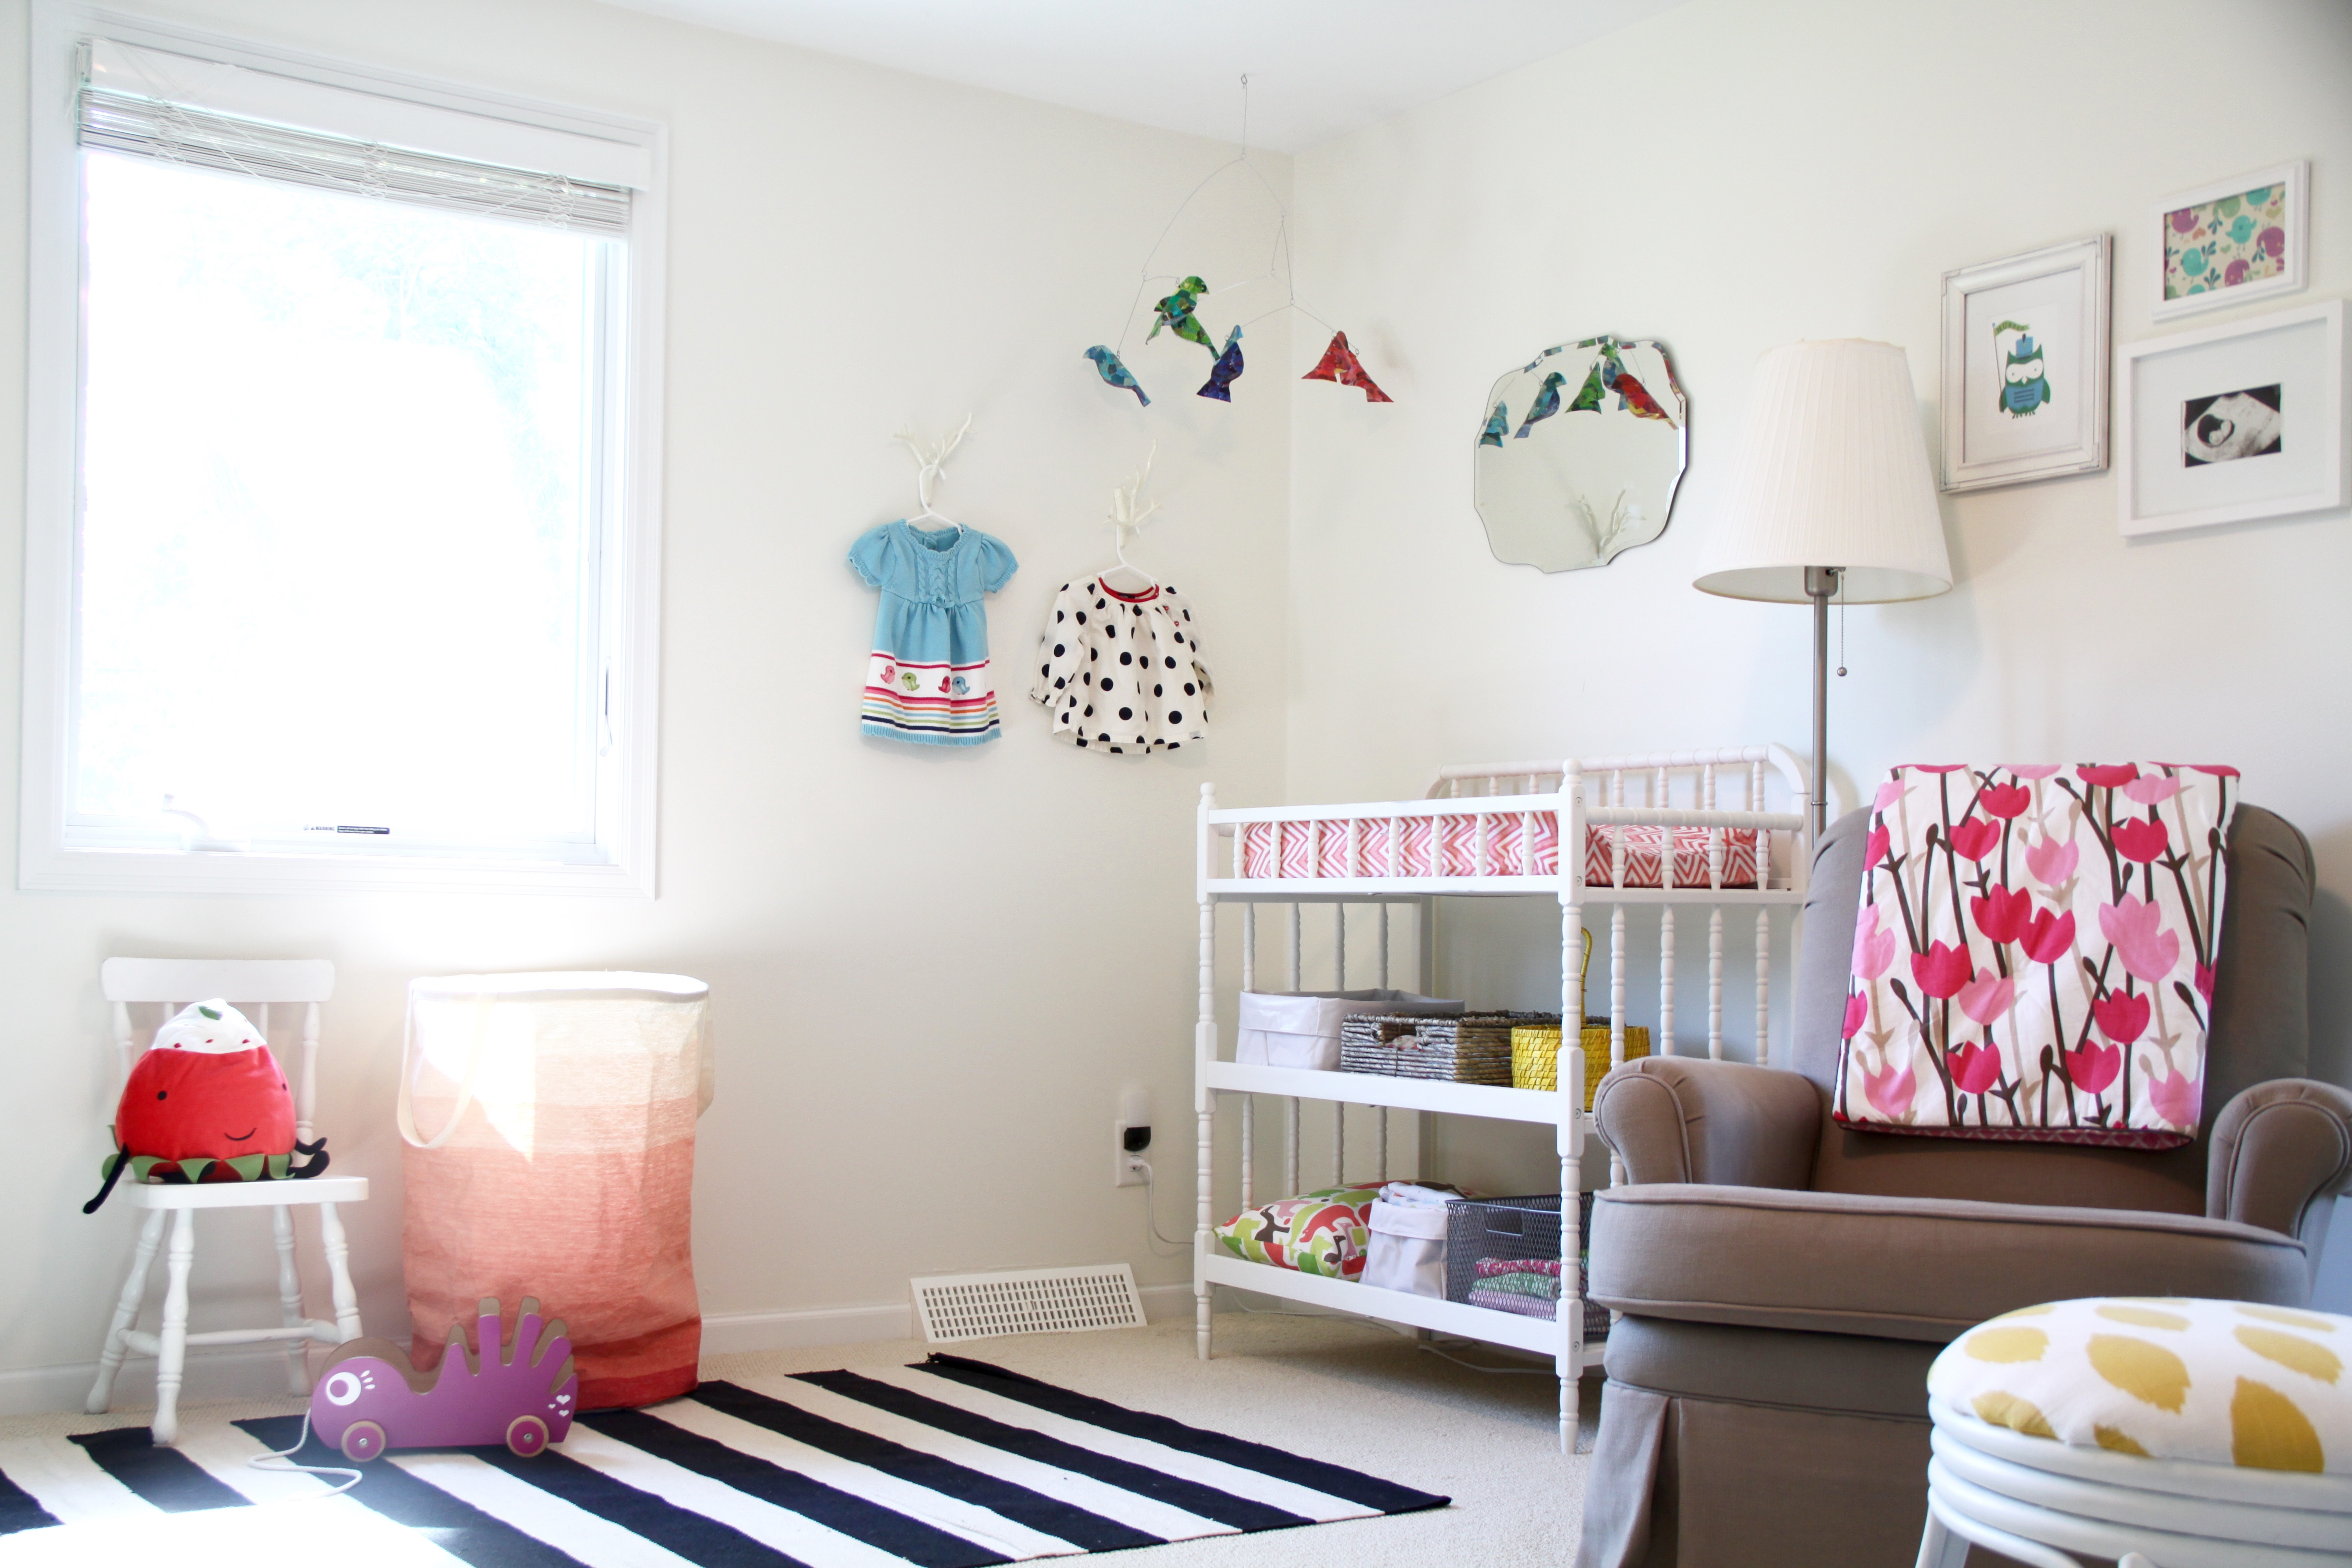 Modern, Colorful, Cheerful Toddler Room